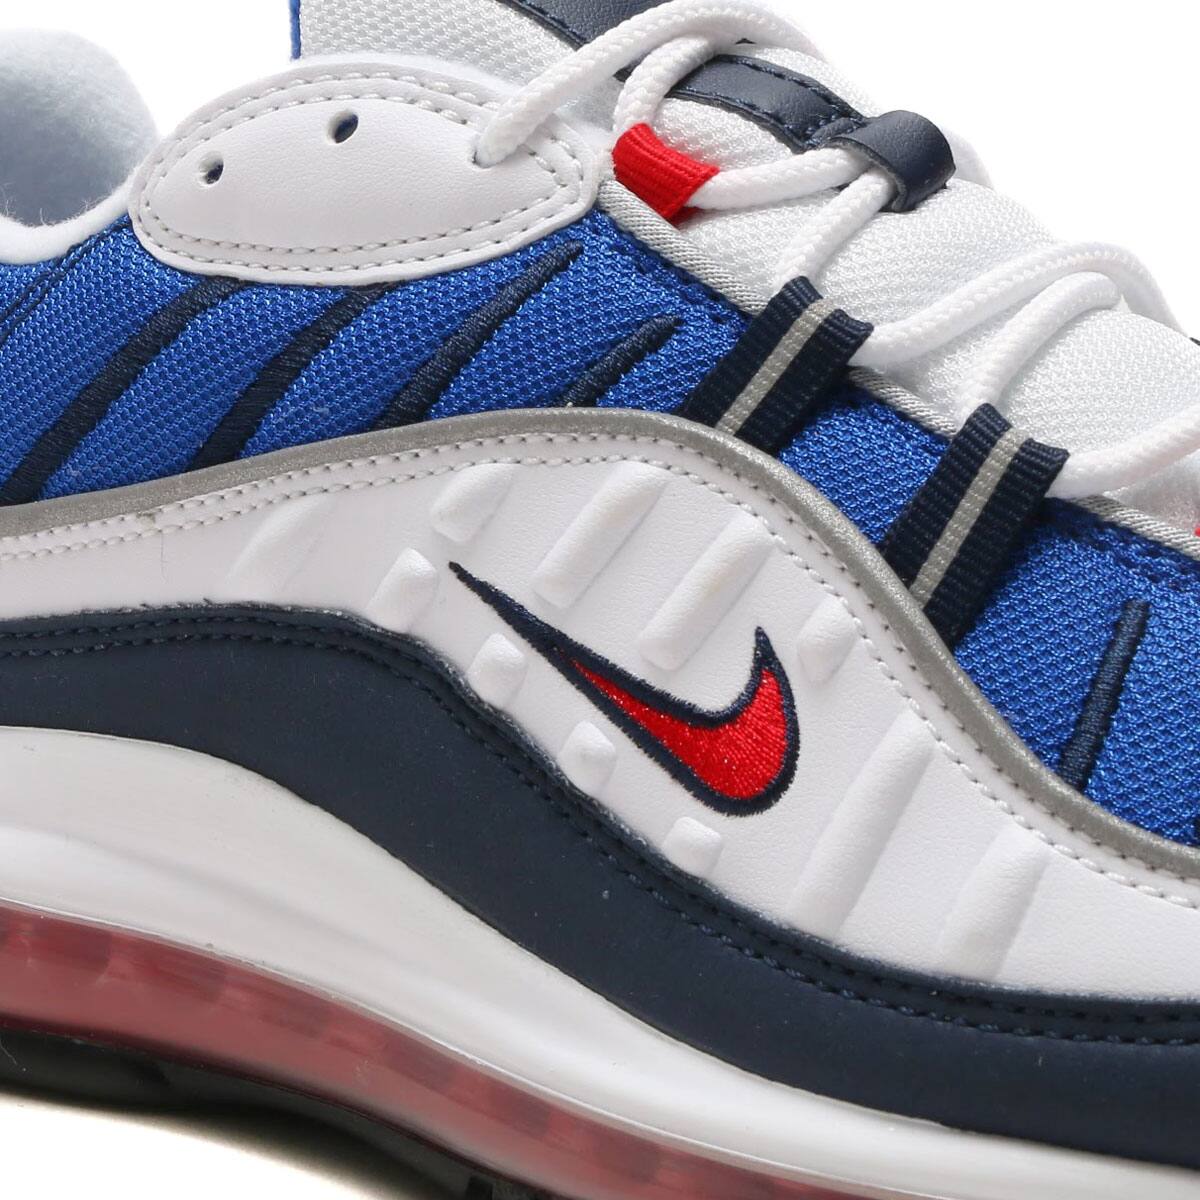 air max 98 white university red obsidian